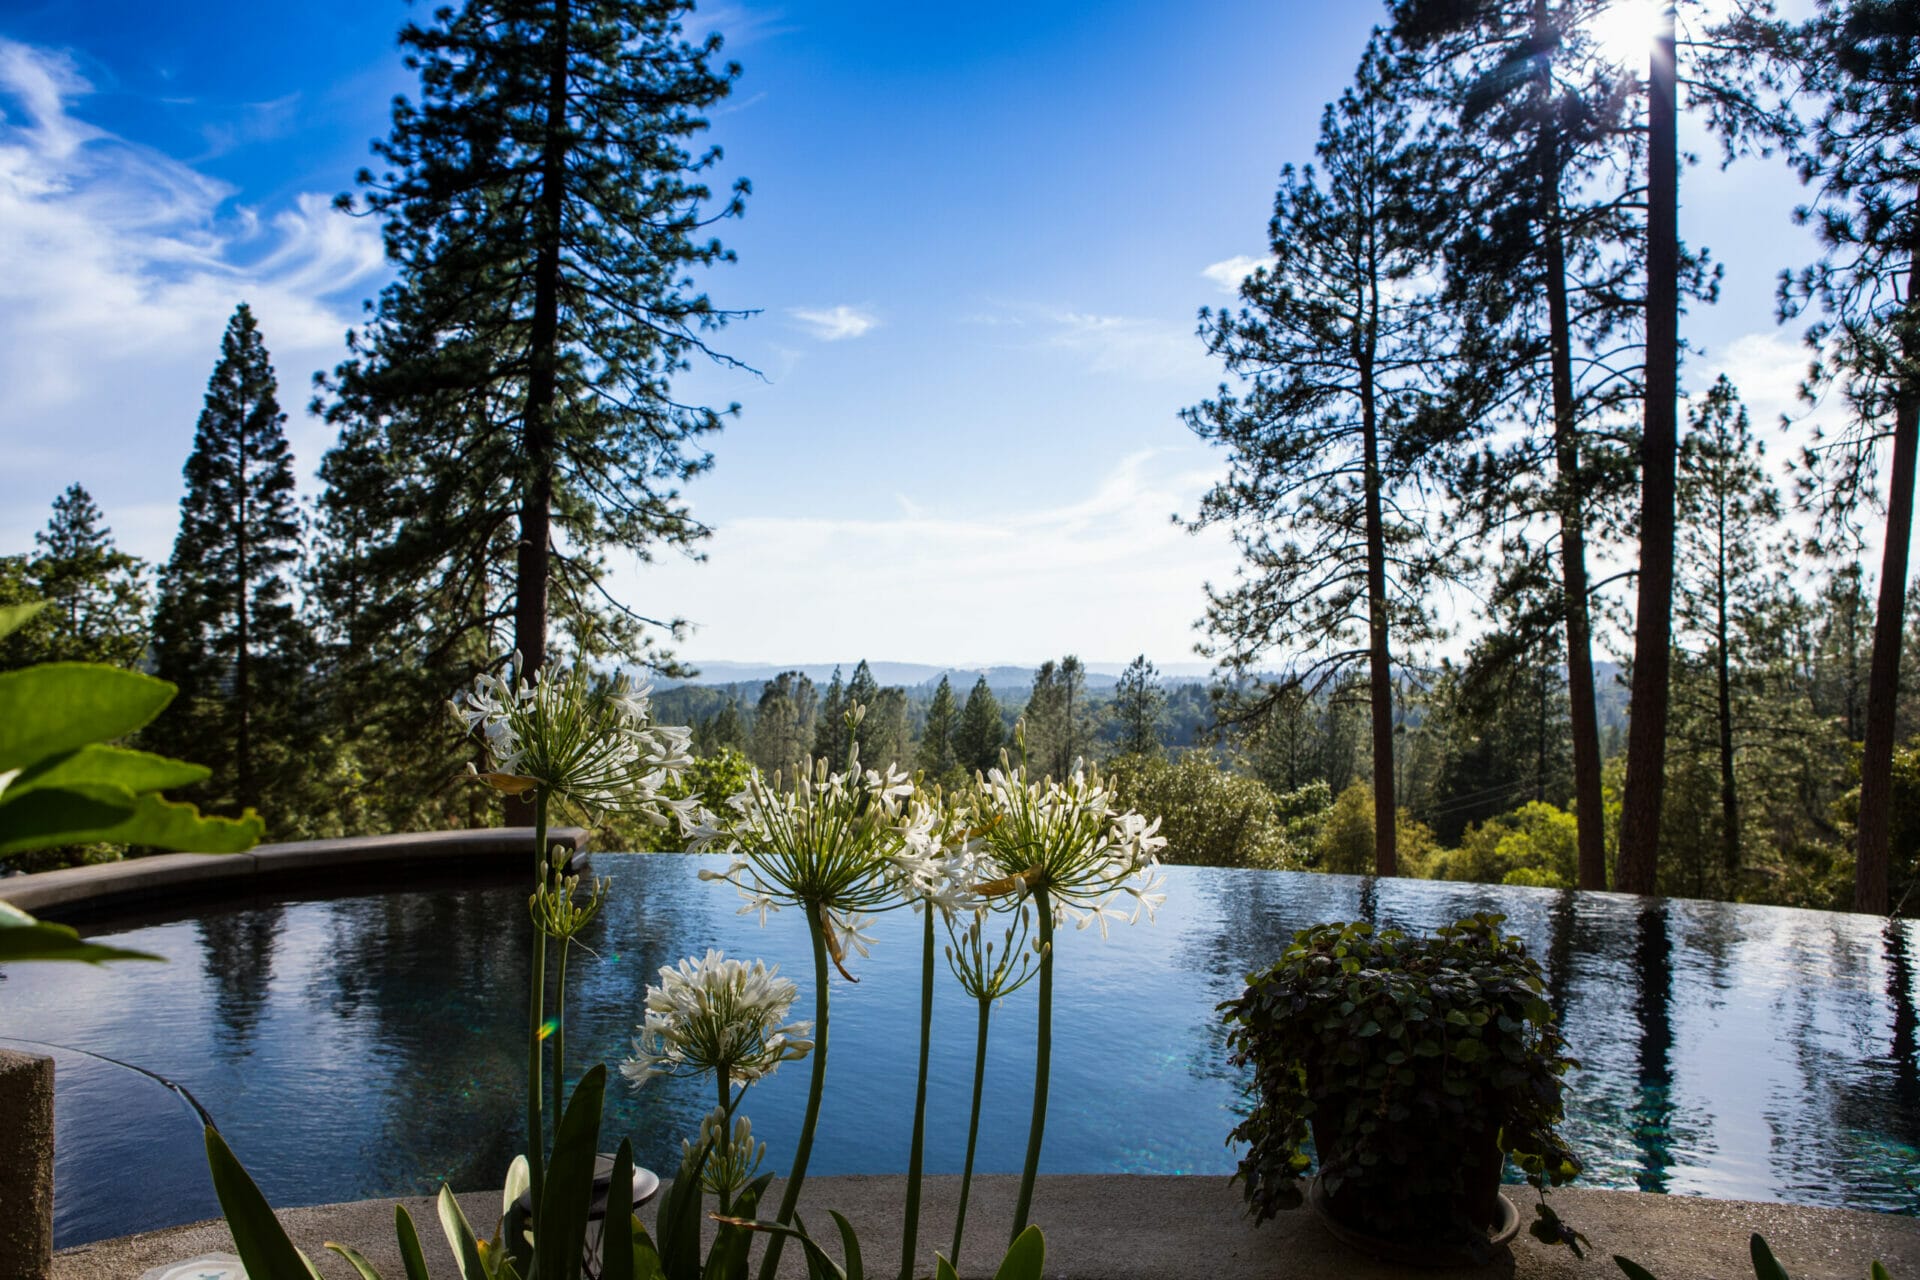 Reverie retreat pool view with the forest